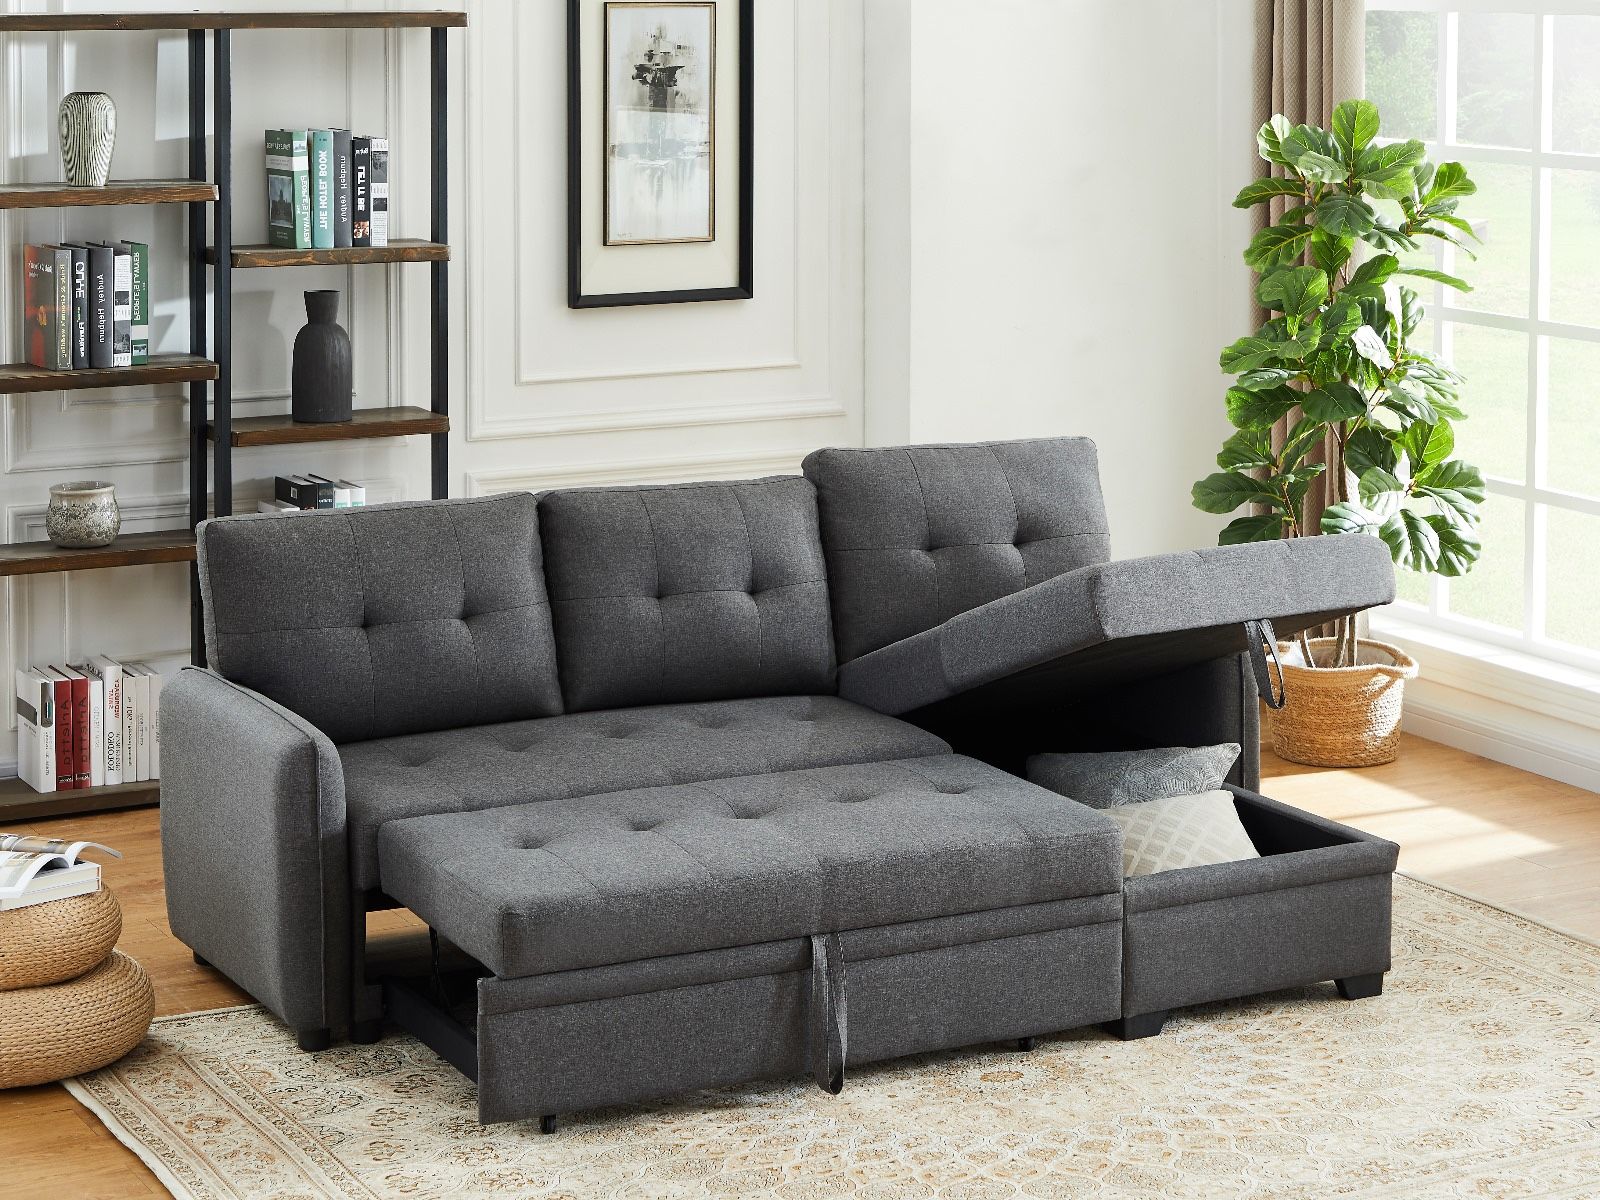 !New! Comfortable Reversible Sectional Sofa Bed, Sofabed, Sectional, Sectionals, Sofabed, Sectional Sofa With Storage, Sleeper Sofa, Sofa Couch Bed